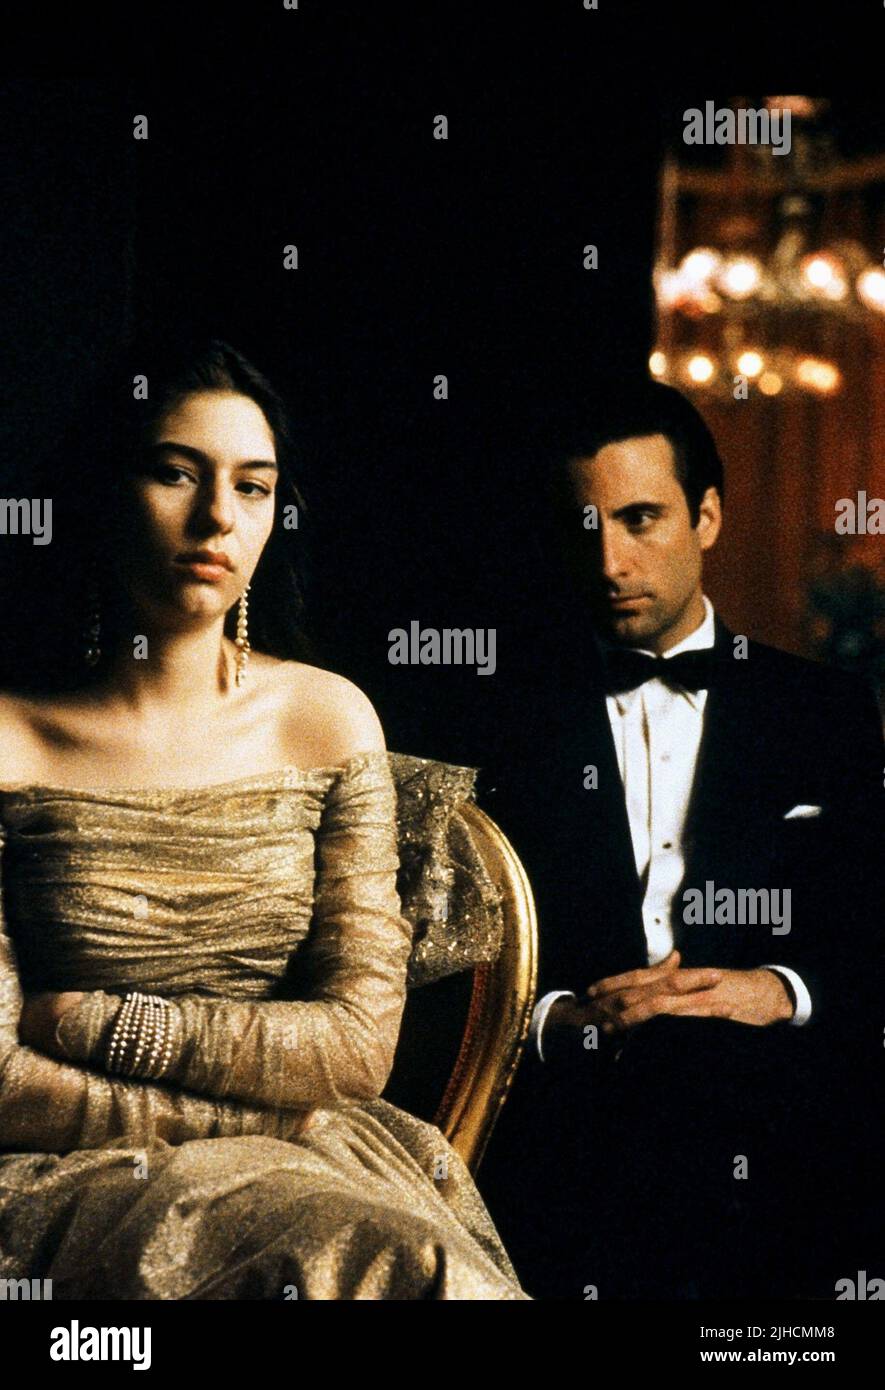 SOFIA COPPOLA, ANDY GARCIA, The Godfather : Part III, 1990 Banque D'Images